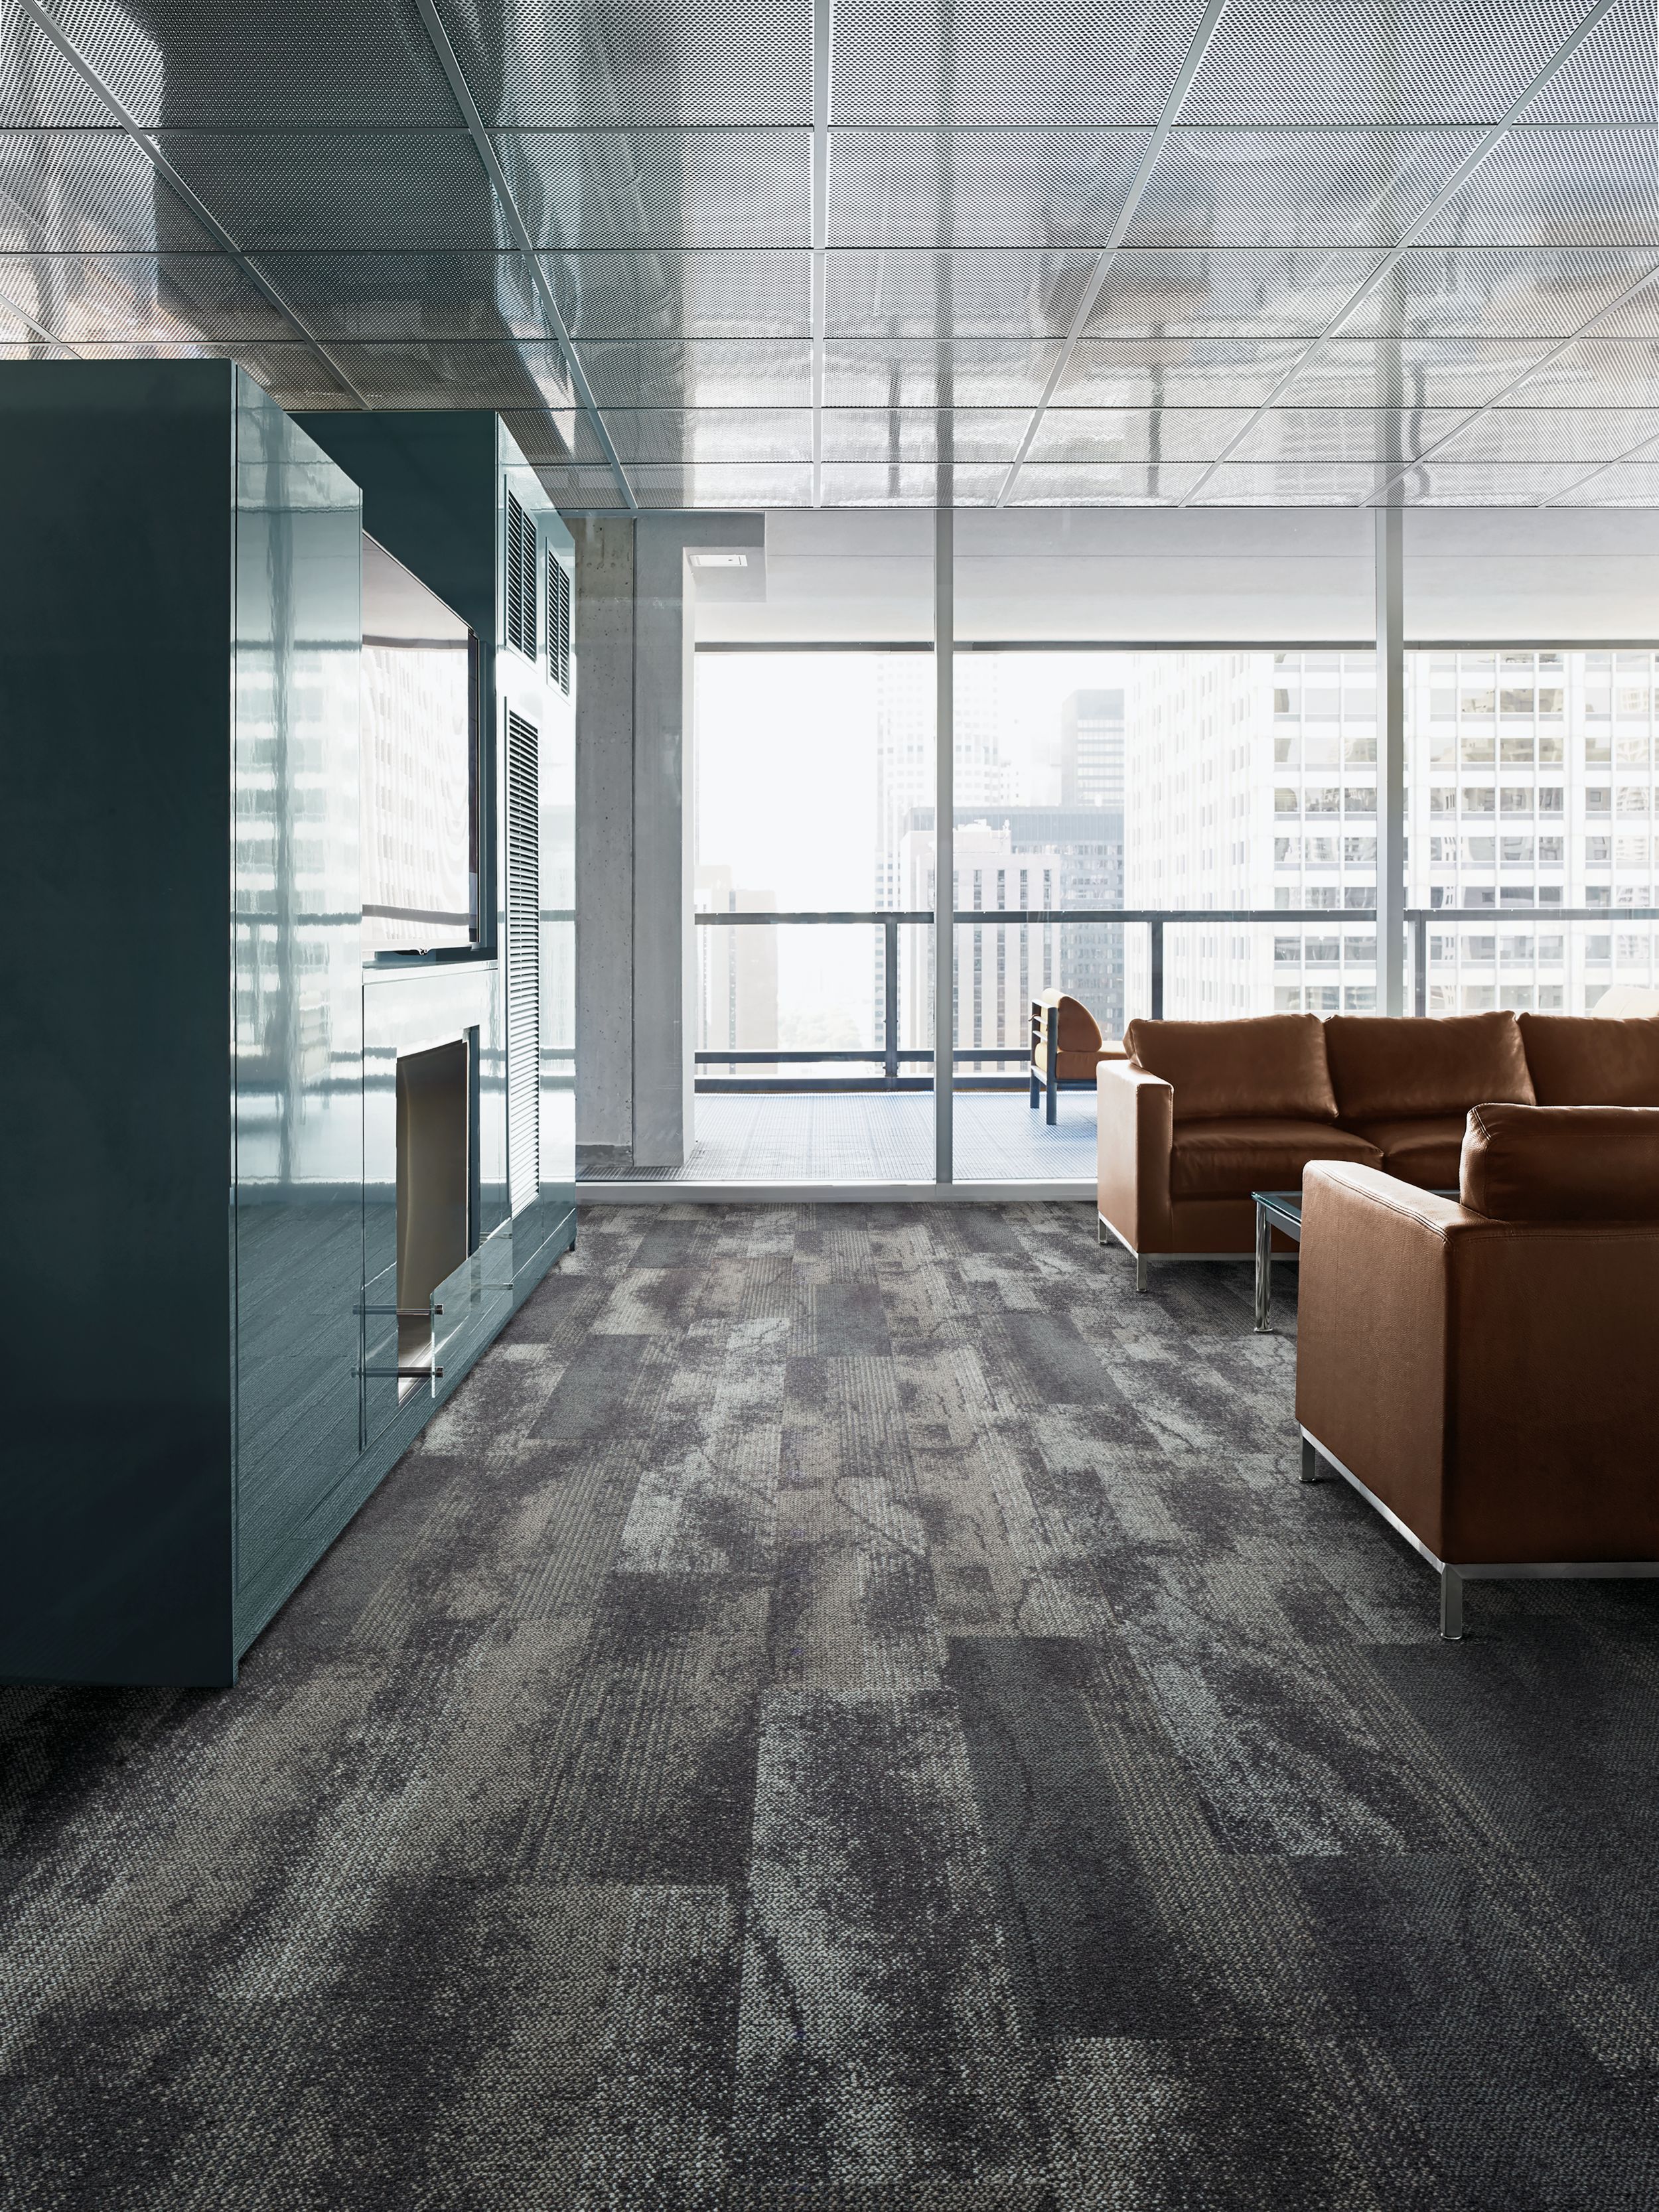 Interface Neighborhood Smooth plank carpet tile in residential public space with brown couches and glass walls numéro d’image 10